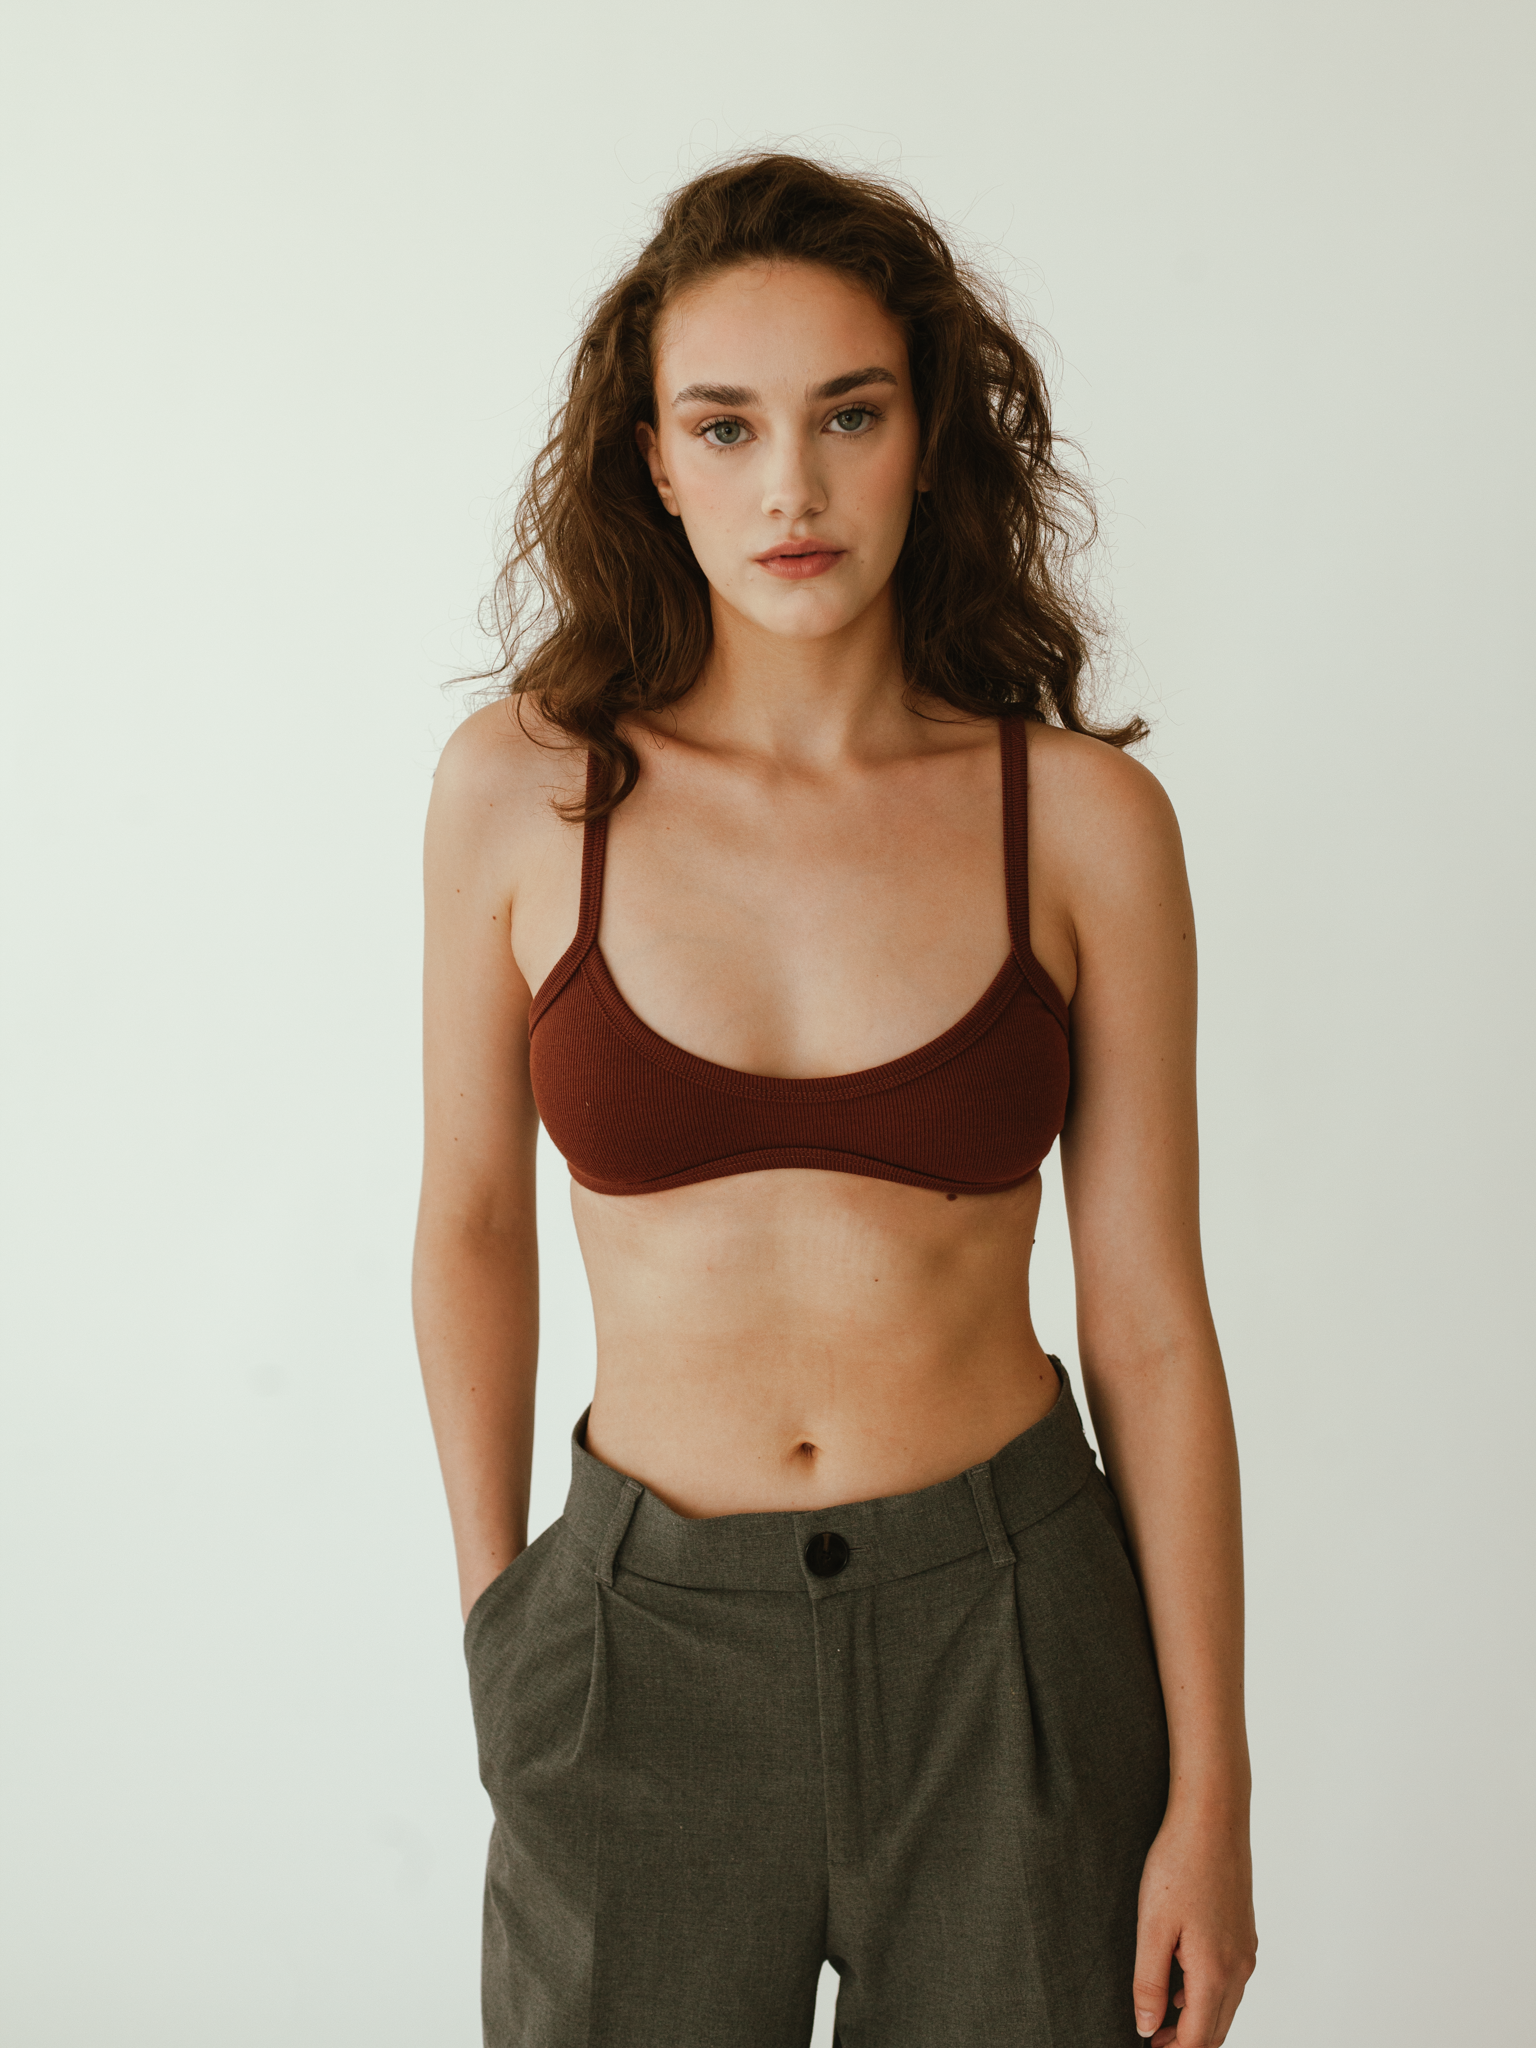 Hand Knit Wool Bralette in Melange , Itchy Woolen Bra, Fitted Crop Top,  Cropped Yoga Top, Knit Bustier Top, Custom Made Bra T883 -  Canada